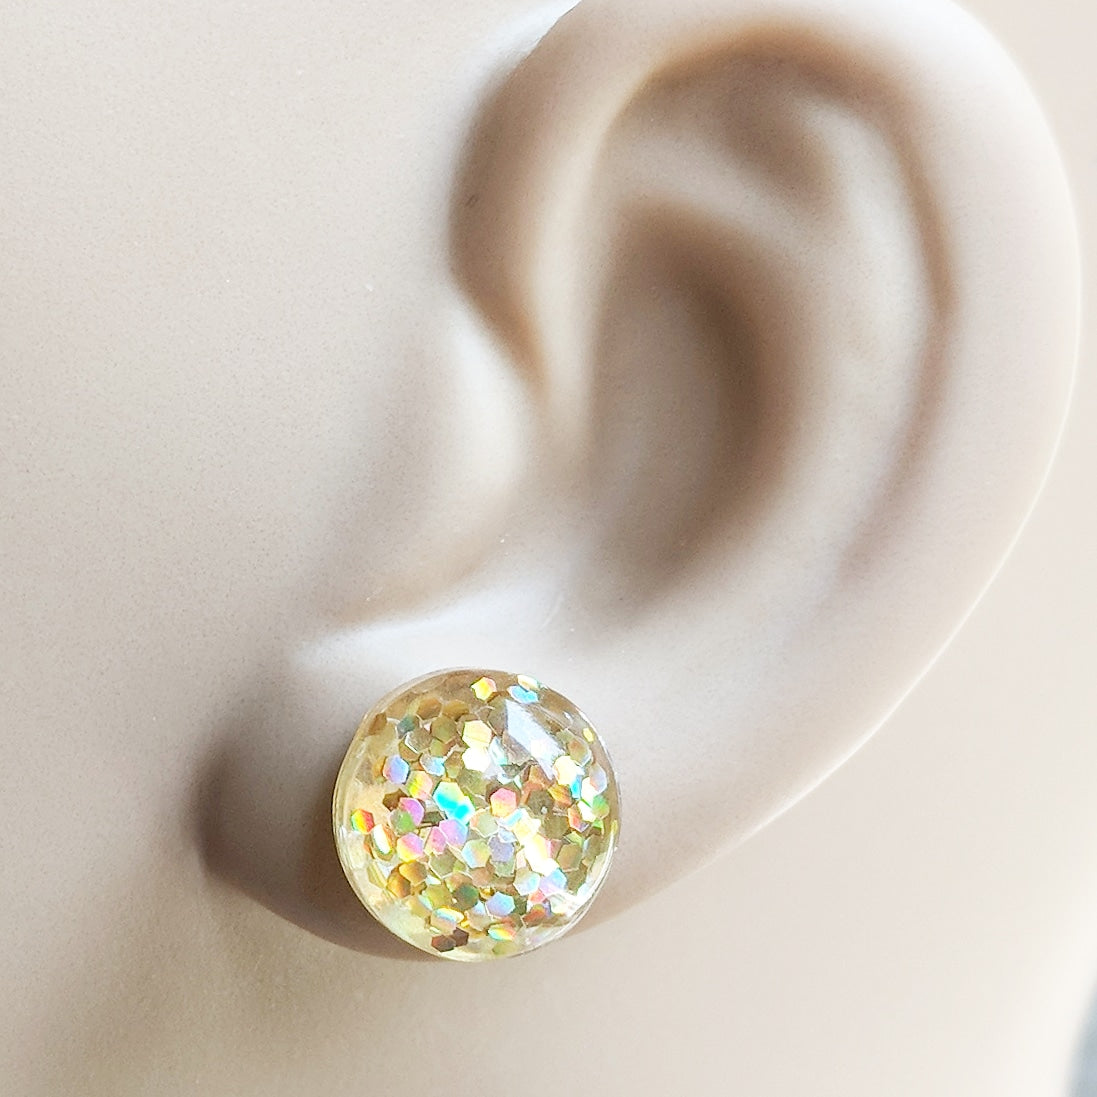 Gold Glitter Bubble Stud Earrings - Hypoallergenic Silver Plated Posts